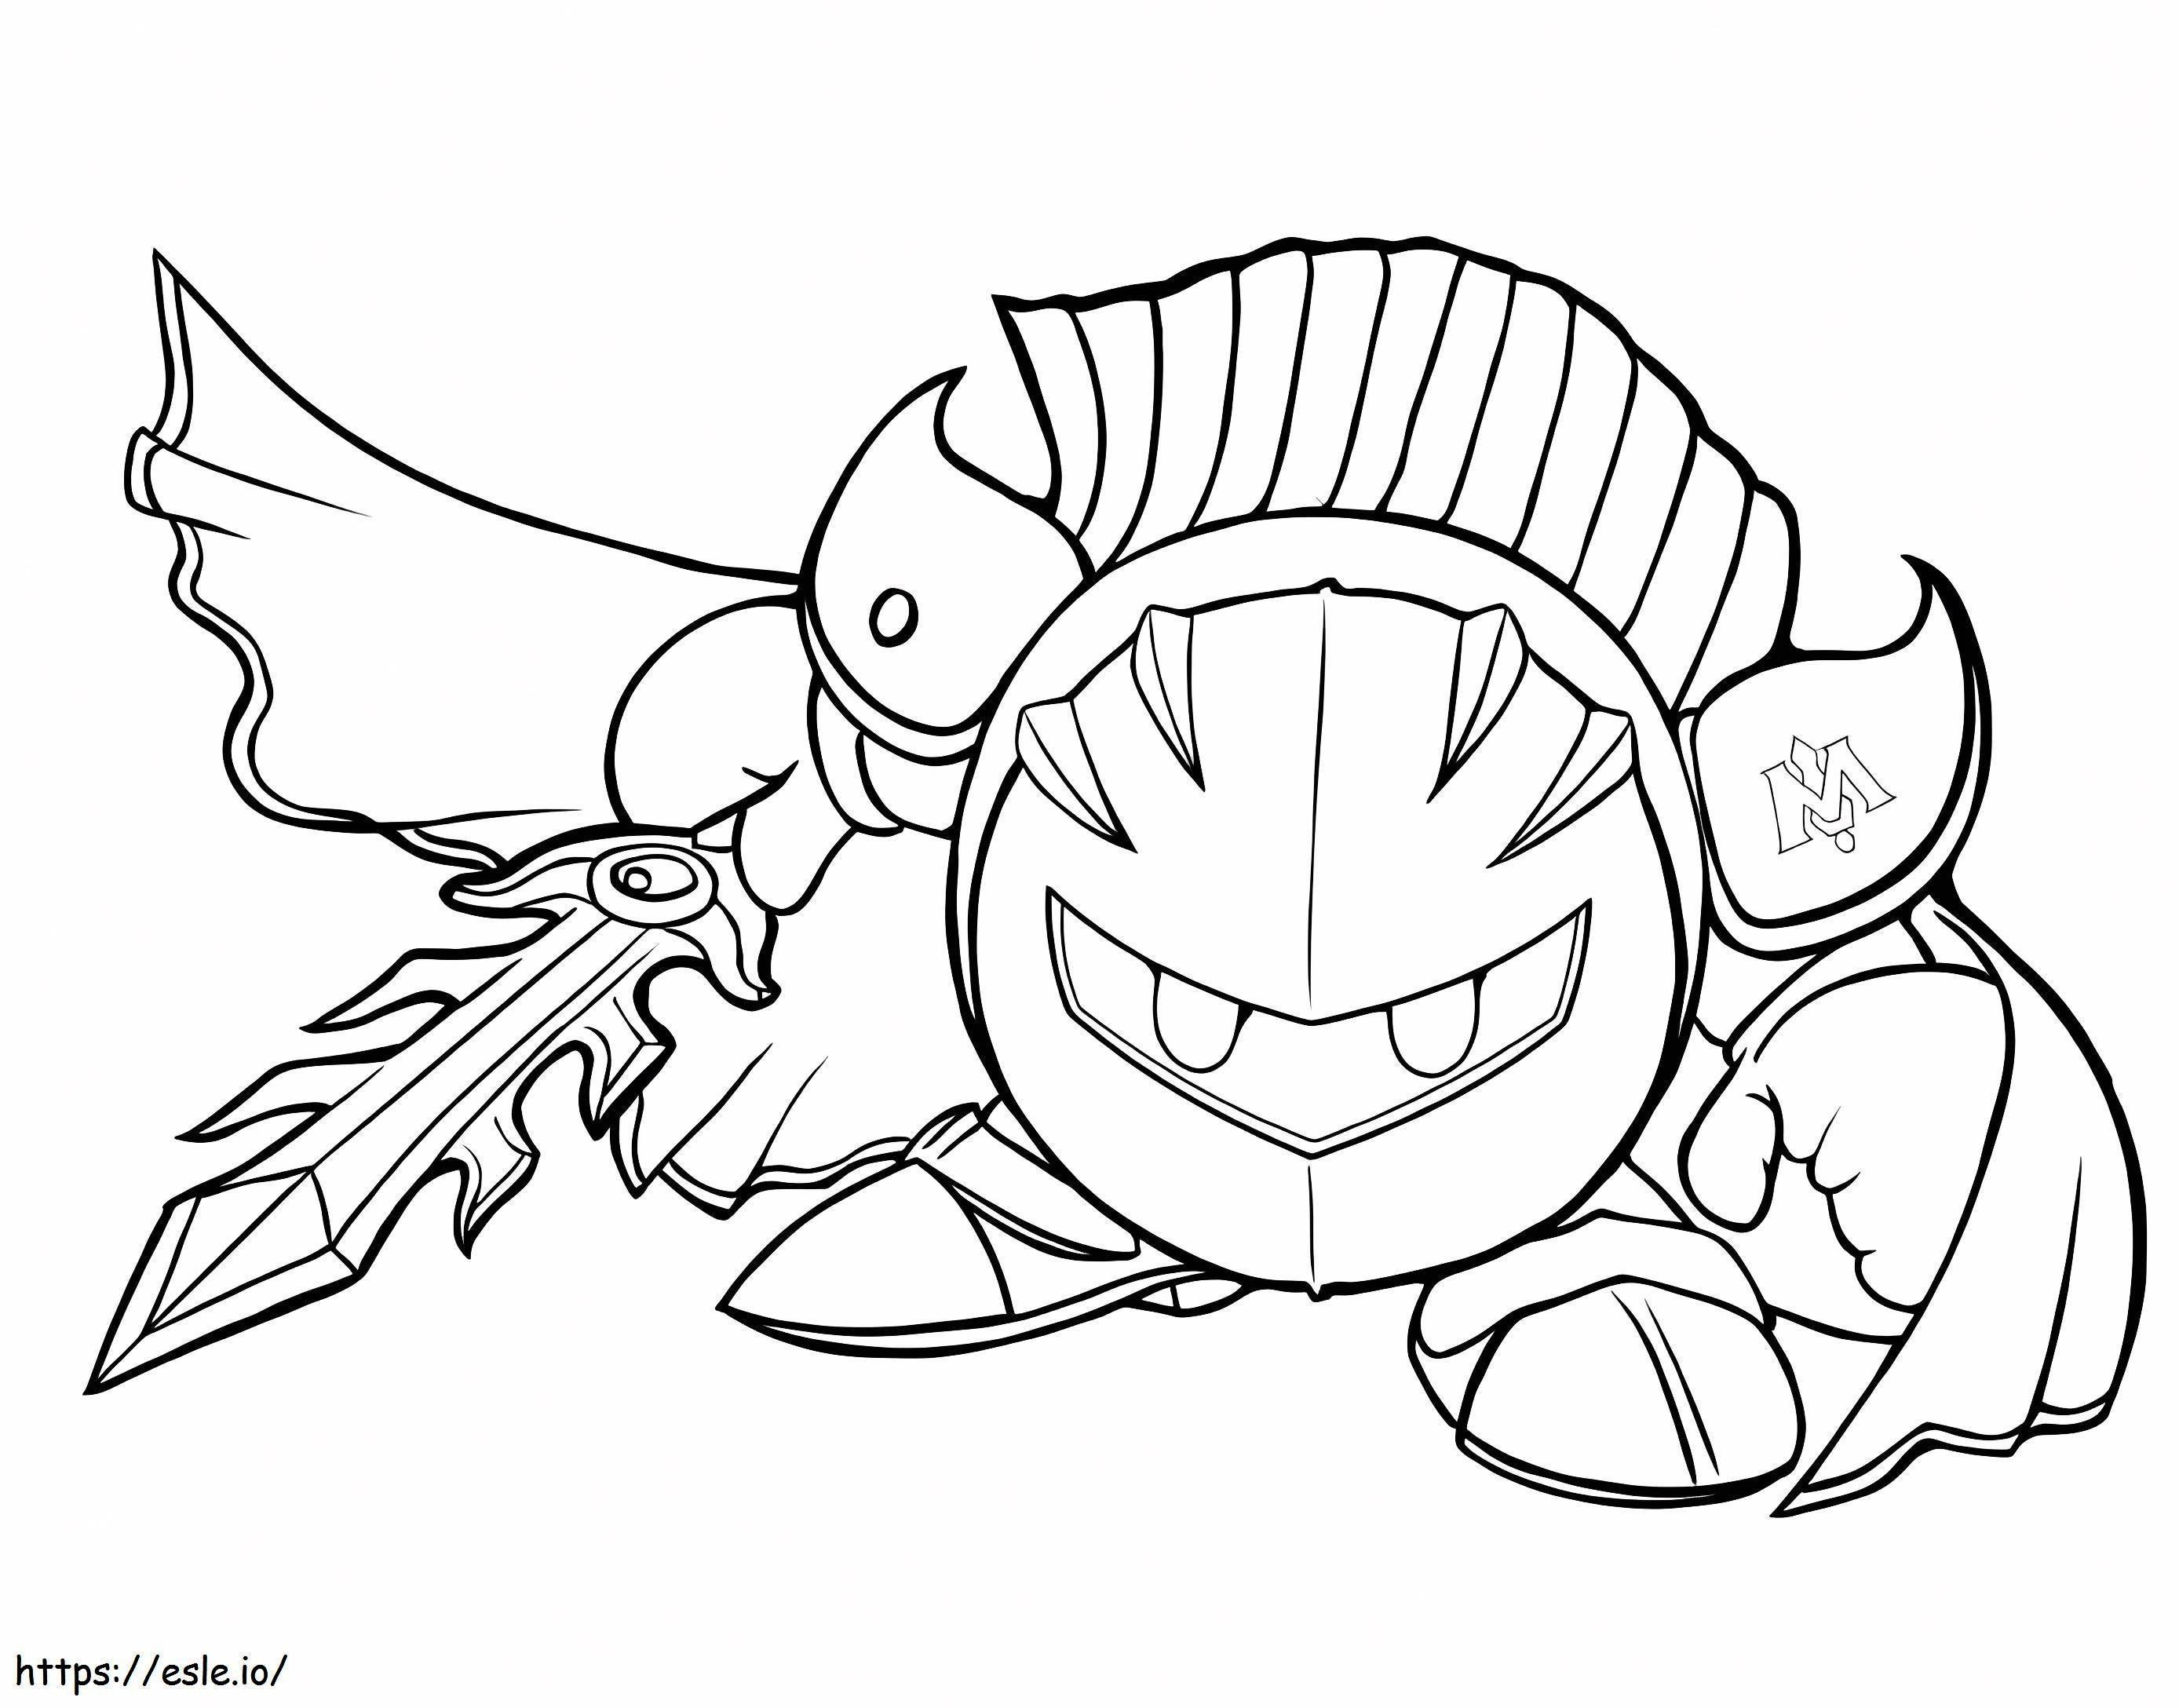 Kirby Meta Knight coloring page